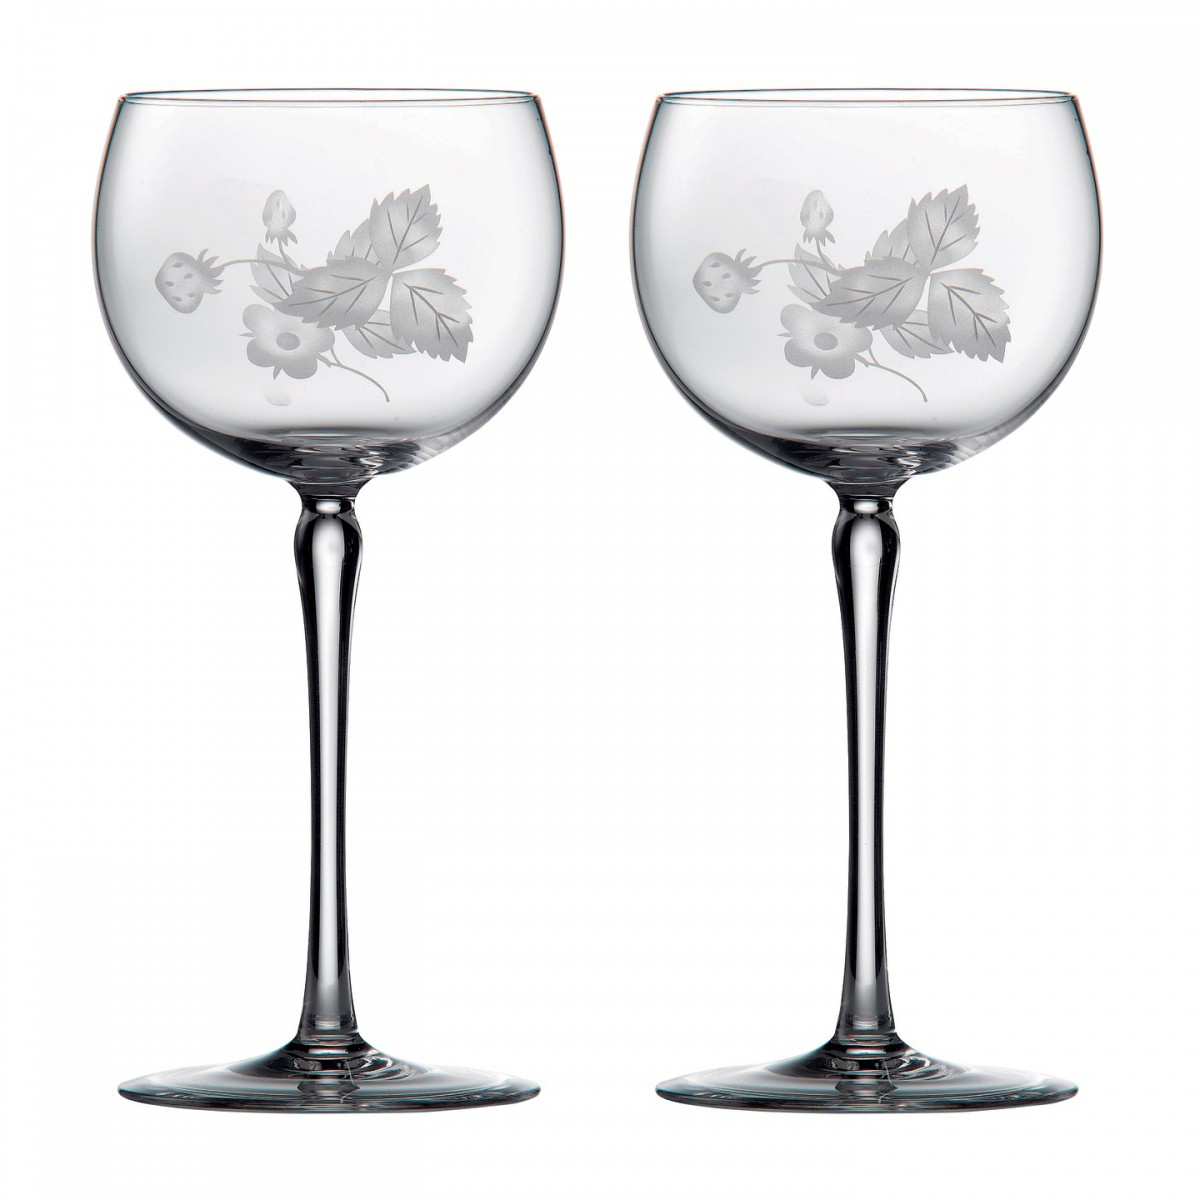 https://cdn11.bigcommerce.com/s-6zwhmb4rdr/images/stencil/original/products/119627/255631/wild-strawberry-crystal-wine-glass-pair-by-wedgwood-6__22605.1652232560.jpg